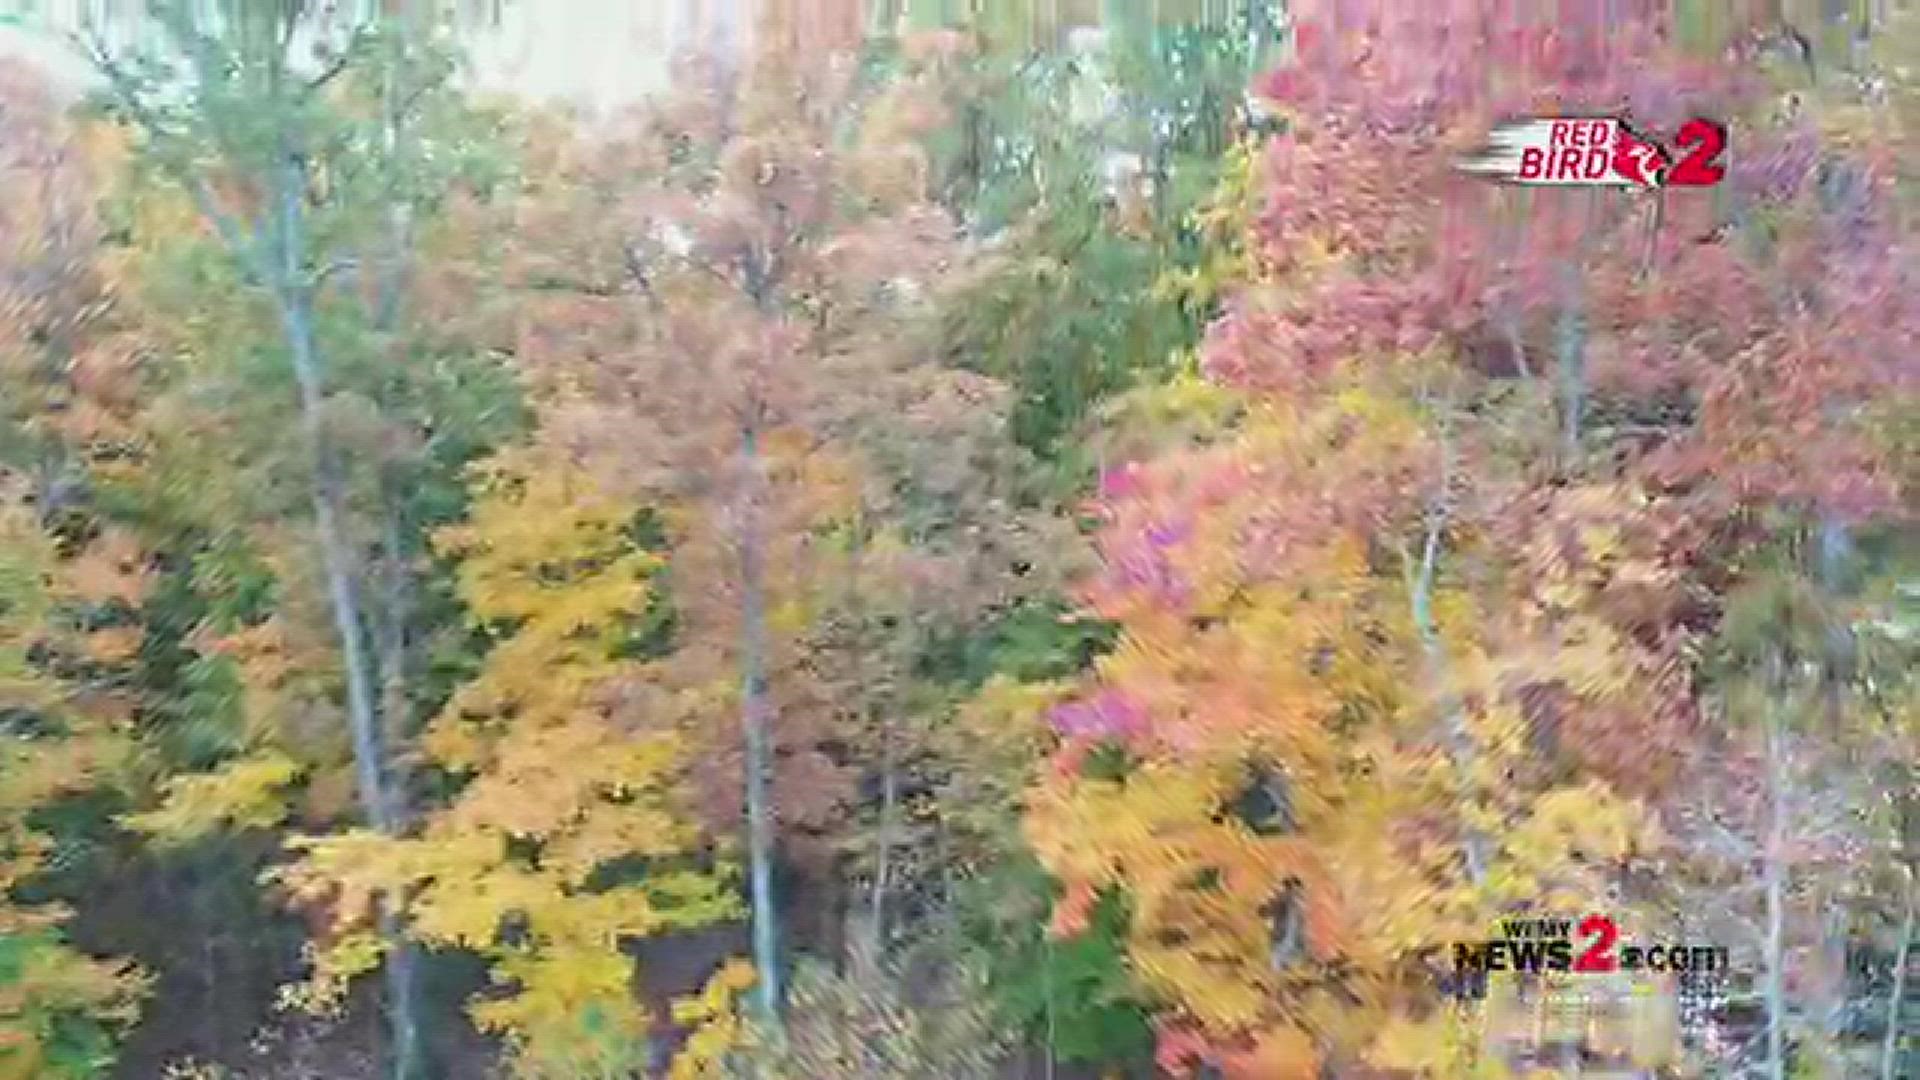 Check out this drone video of the fall leaves in Country Park in Greensboro!